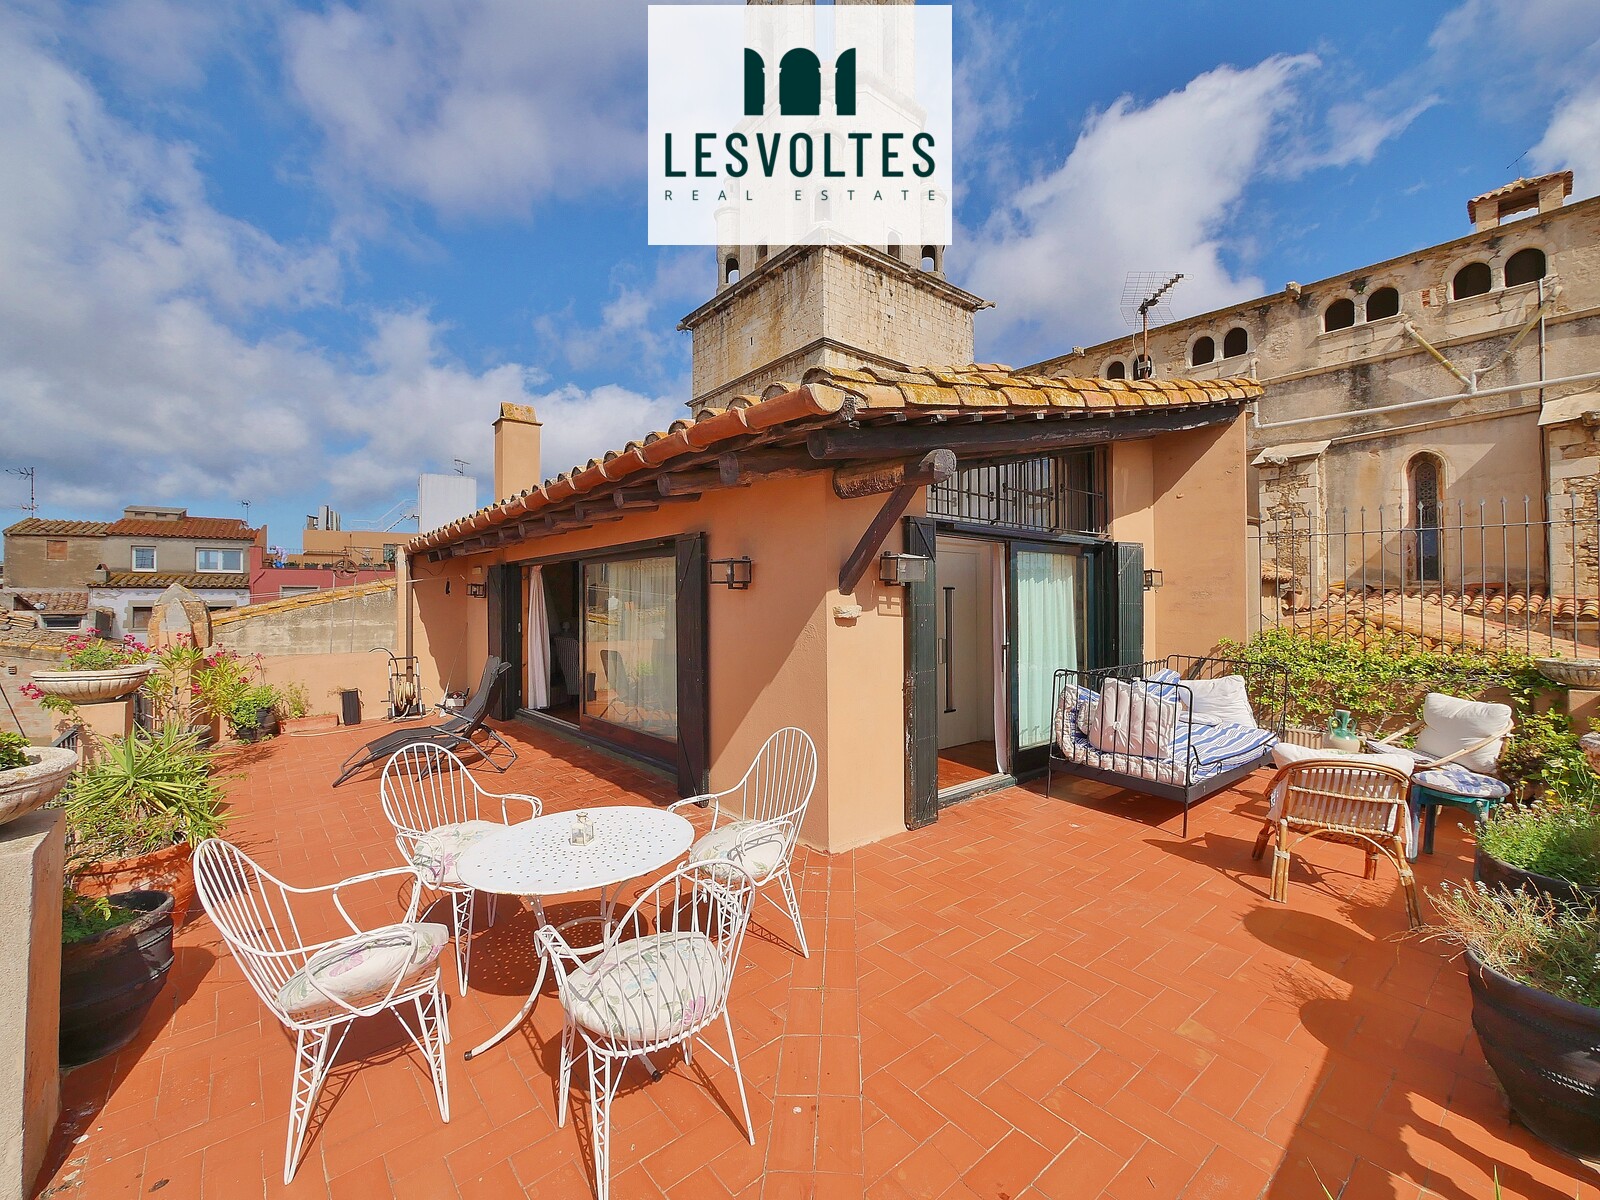 RUSTIC HOUSE OF 220 M2 WITH TERRACE FOR SALE IN THE CENTRE OF PALAFRUGELL.